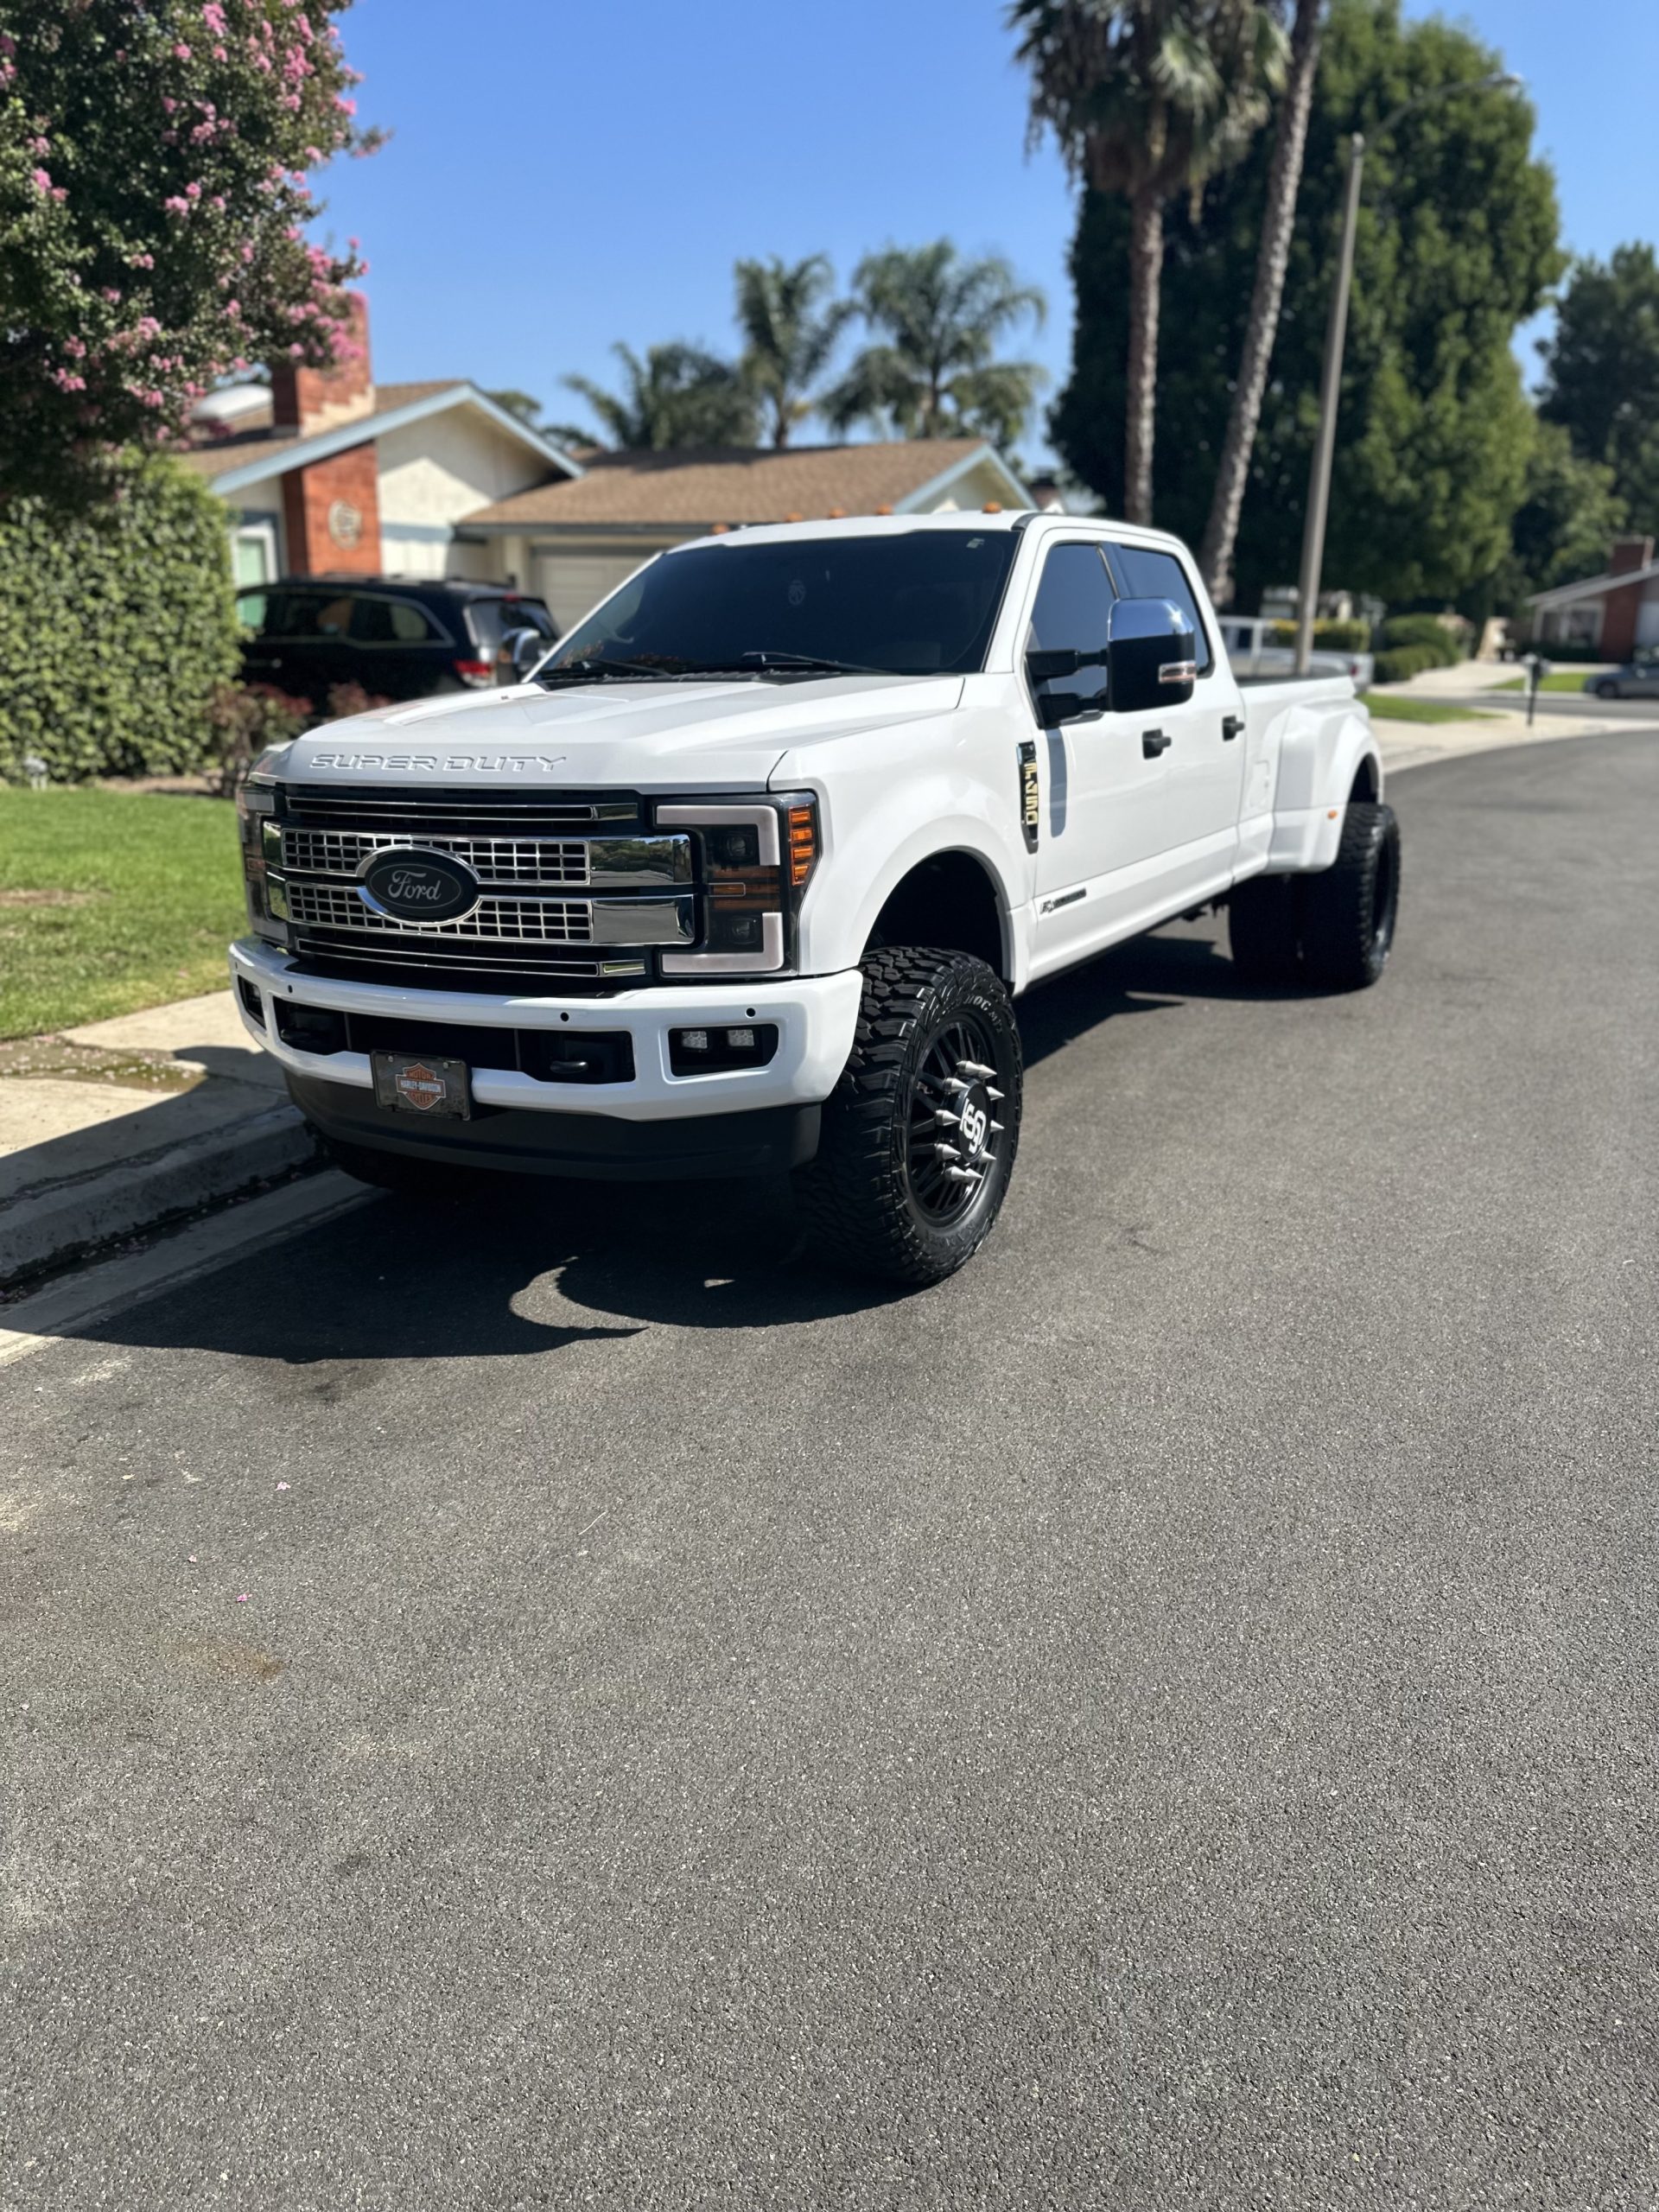 2019 Ford F350 Dually 4×4